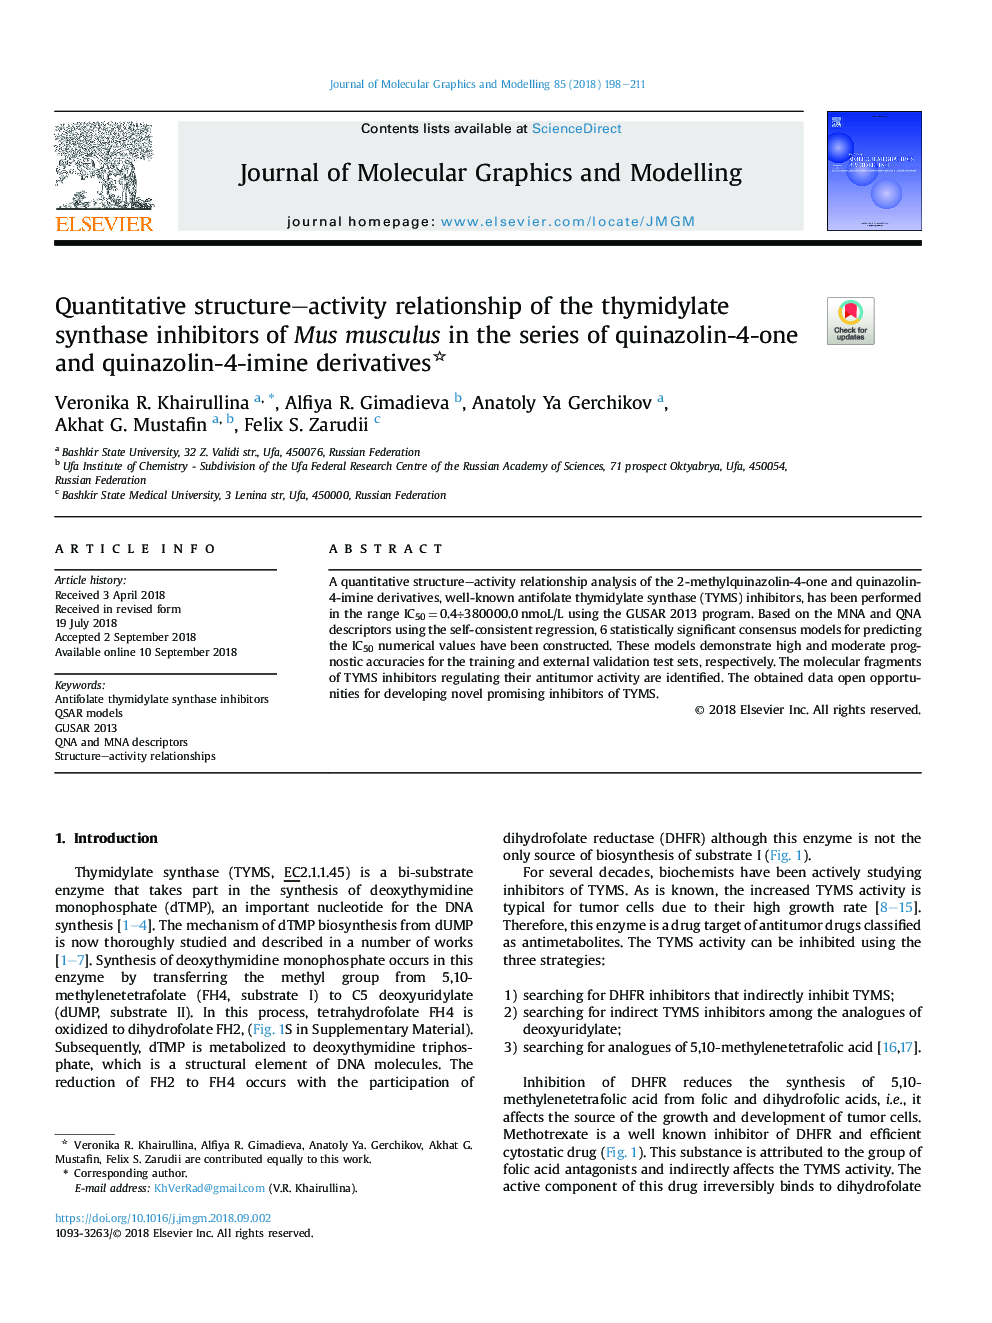 Quantitative structure-activity relationship of the thymidylate synthase inhibitors of Mus musculus in the series of quinazolin-4-one and quinazolin-4-imine derivatives